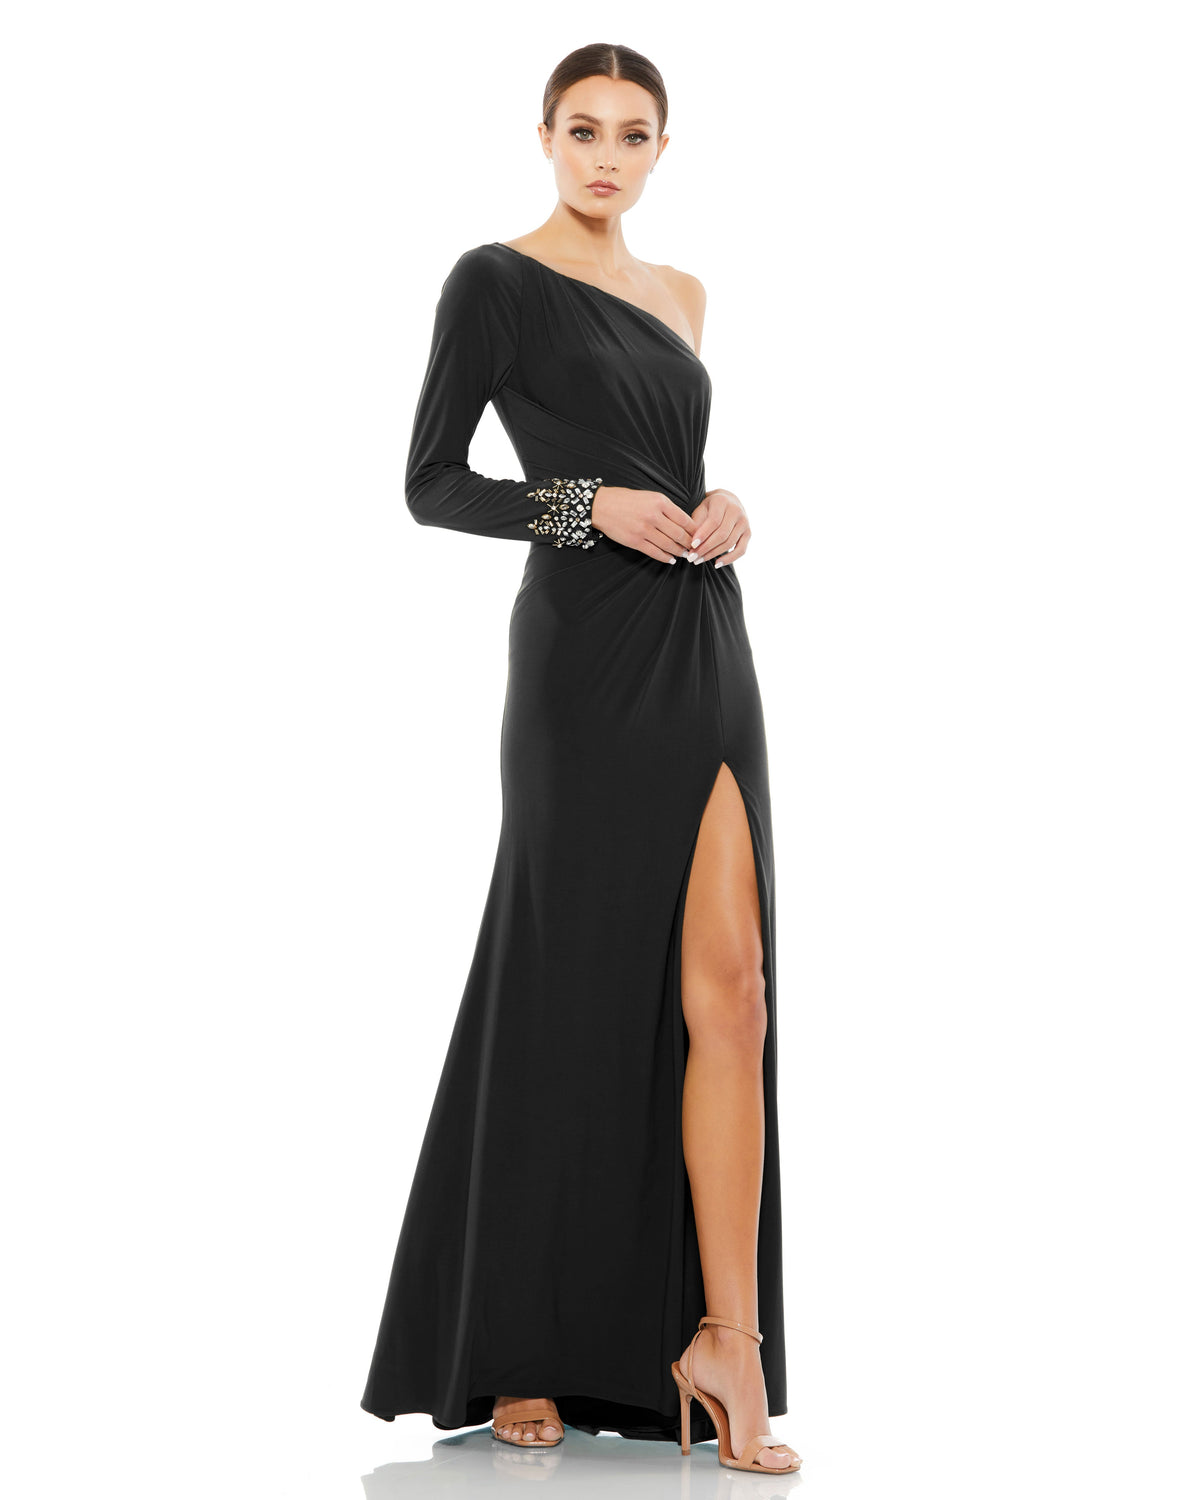 This stunning Mac Duggal elegant, asymmetric evening dress, crafted from smooth jersey fabric, the floor-grazing dress is textured with pleats, an off-center waist twist, and starburst beads and glittering rhinestones at the edge of the single sleeve. A high slit underscores the gown’s sexy and modern styling. It’s perfect for a special-occasions proms and weddings!